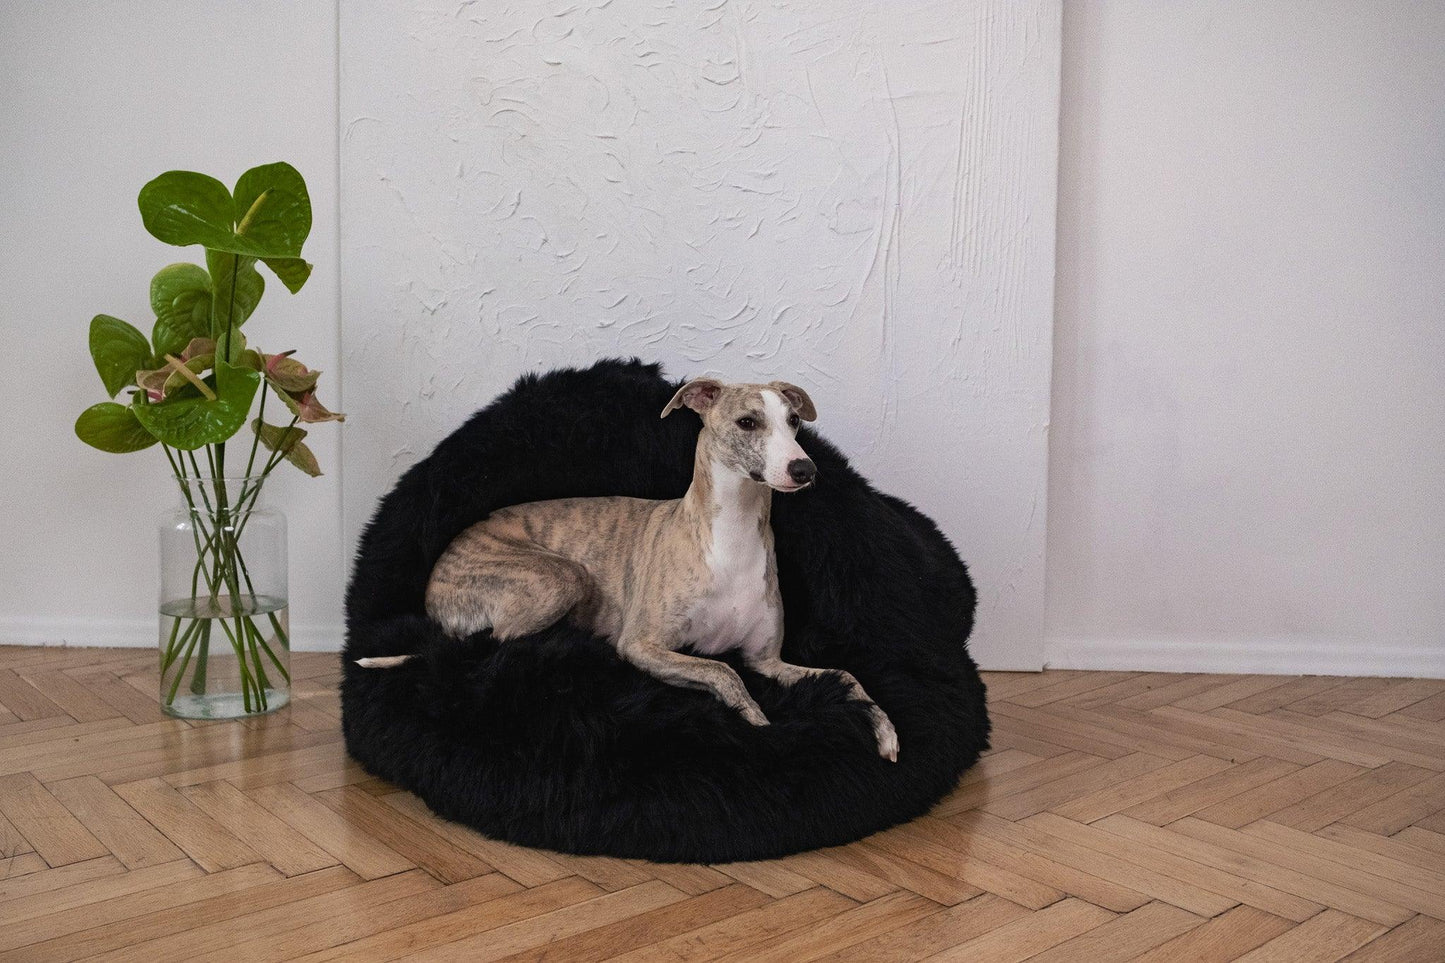 A greyhound dog sitting on a Natural Sheepskin Pet Cave - Black from Mellow Pet Store.